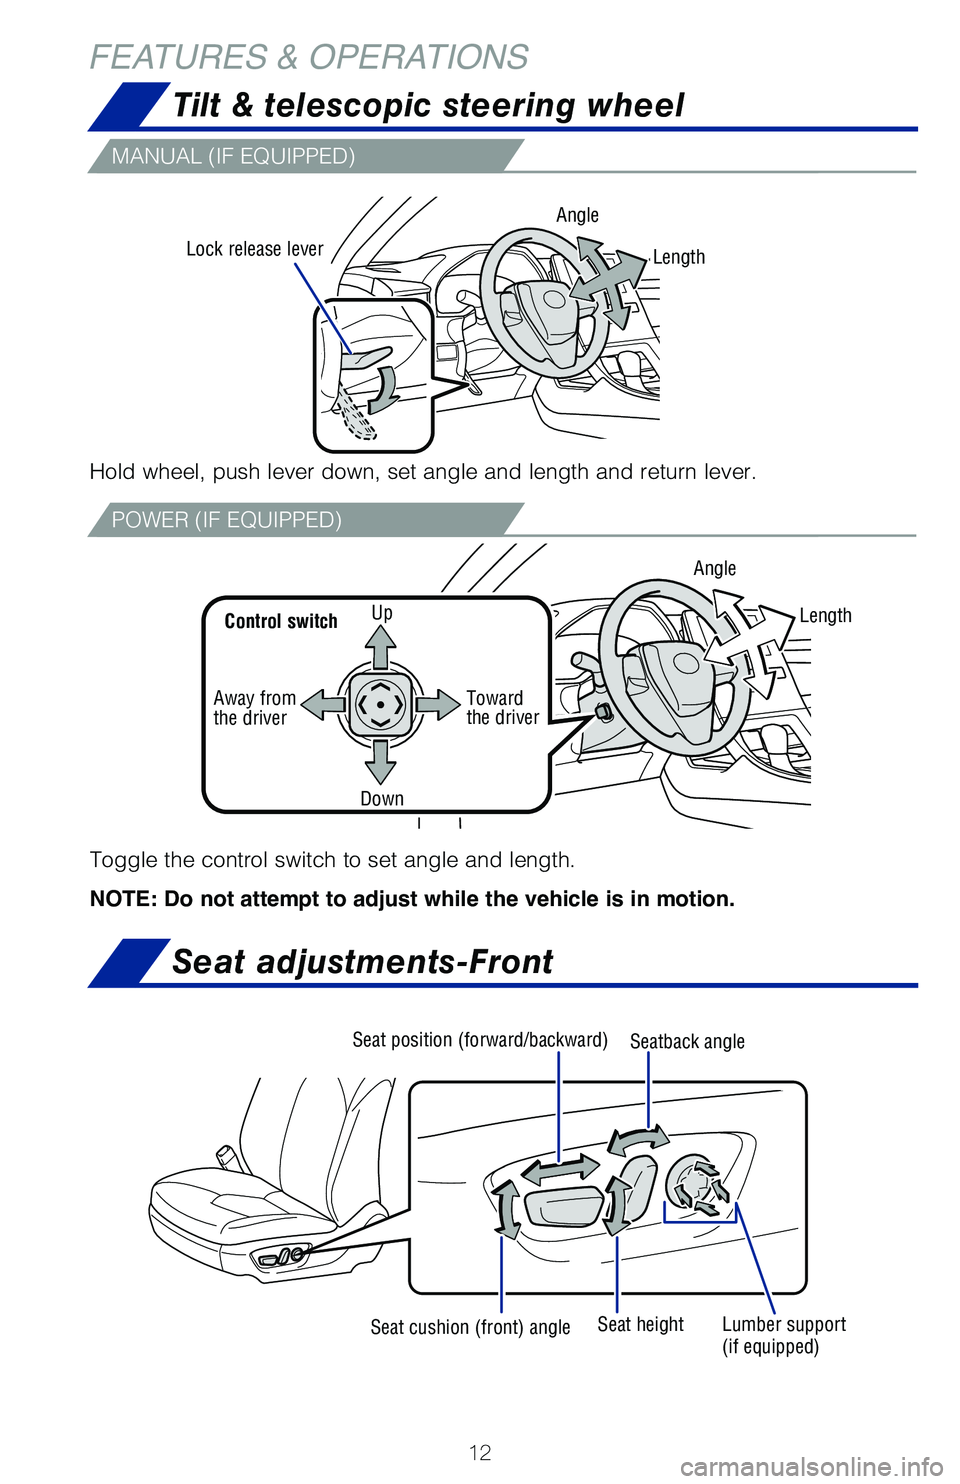 TOYOTA AVALON 2020  Owners Manual (in English) 12
FEATURES & OPERATIONS
MANUAL (IF EQUIPPED)
POWER (IF EQUIPPED)
Hold wheel, push lever down, set angle and length and return lever.
Lock release leverAngle
Toggle the control switch to set angle and